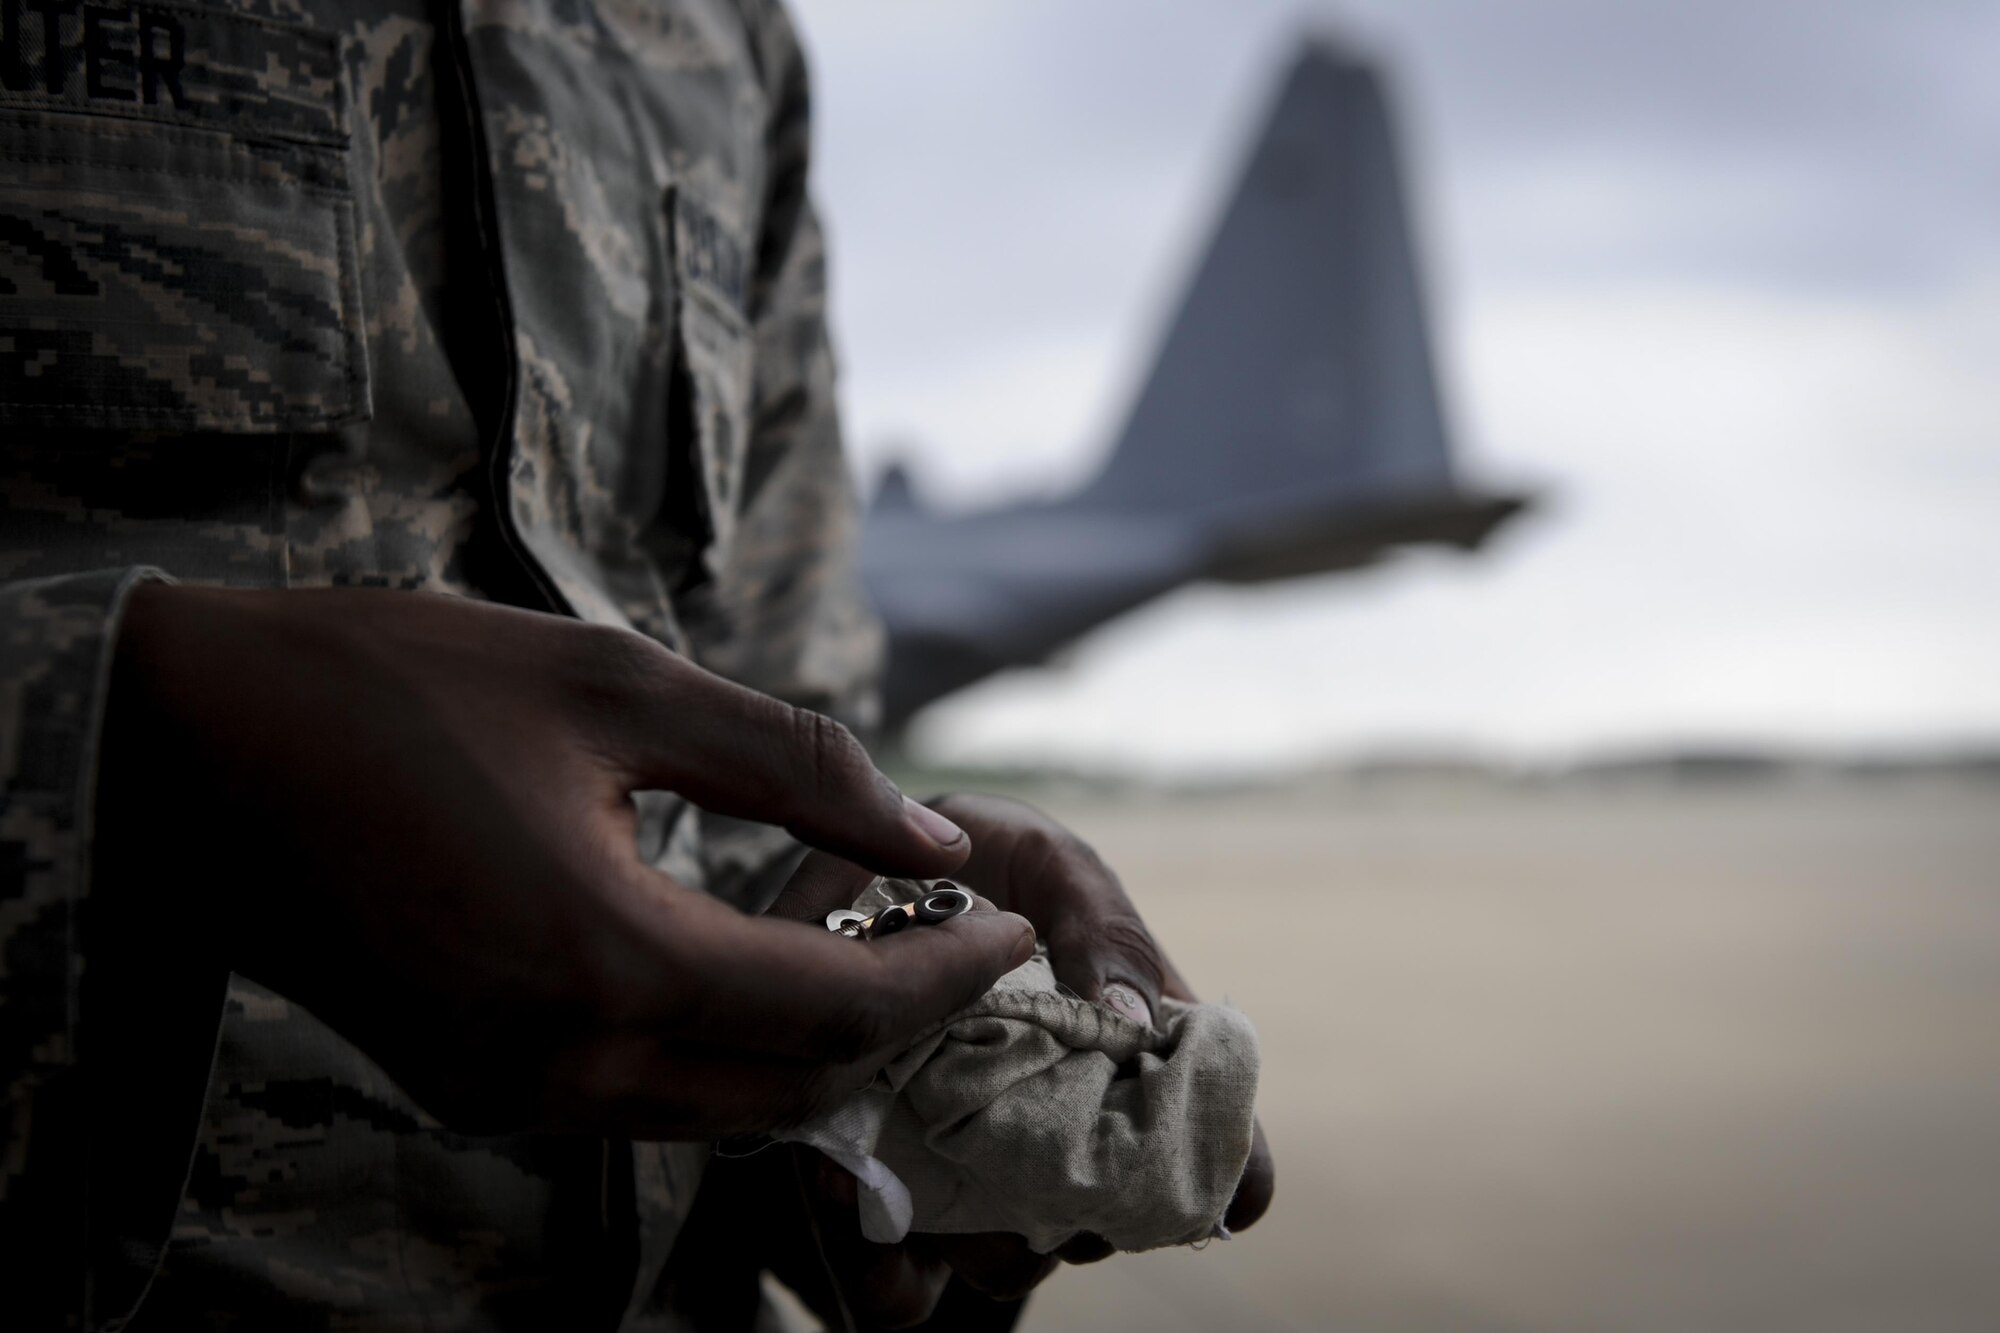 Airman 1st Class Anthony Hunter, a crew chief with the 4th Aircraft Maintenance Unit, removes screws from a small pouch at Hurlburt Field, Fla., May 19, 2017. Hunter helped install a new flat baffle to an AC-130U Spooky gunship. This part is installed on the wings of the aircraft and is replaced as needed. (U.S. Air Force photo by Airman 1st Class Dennis Spain)